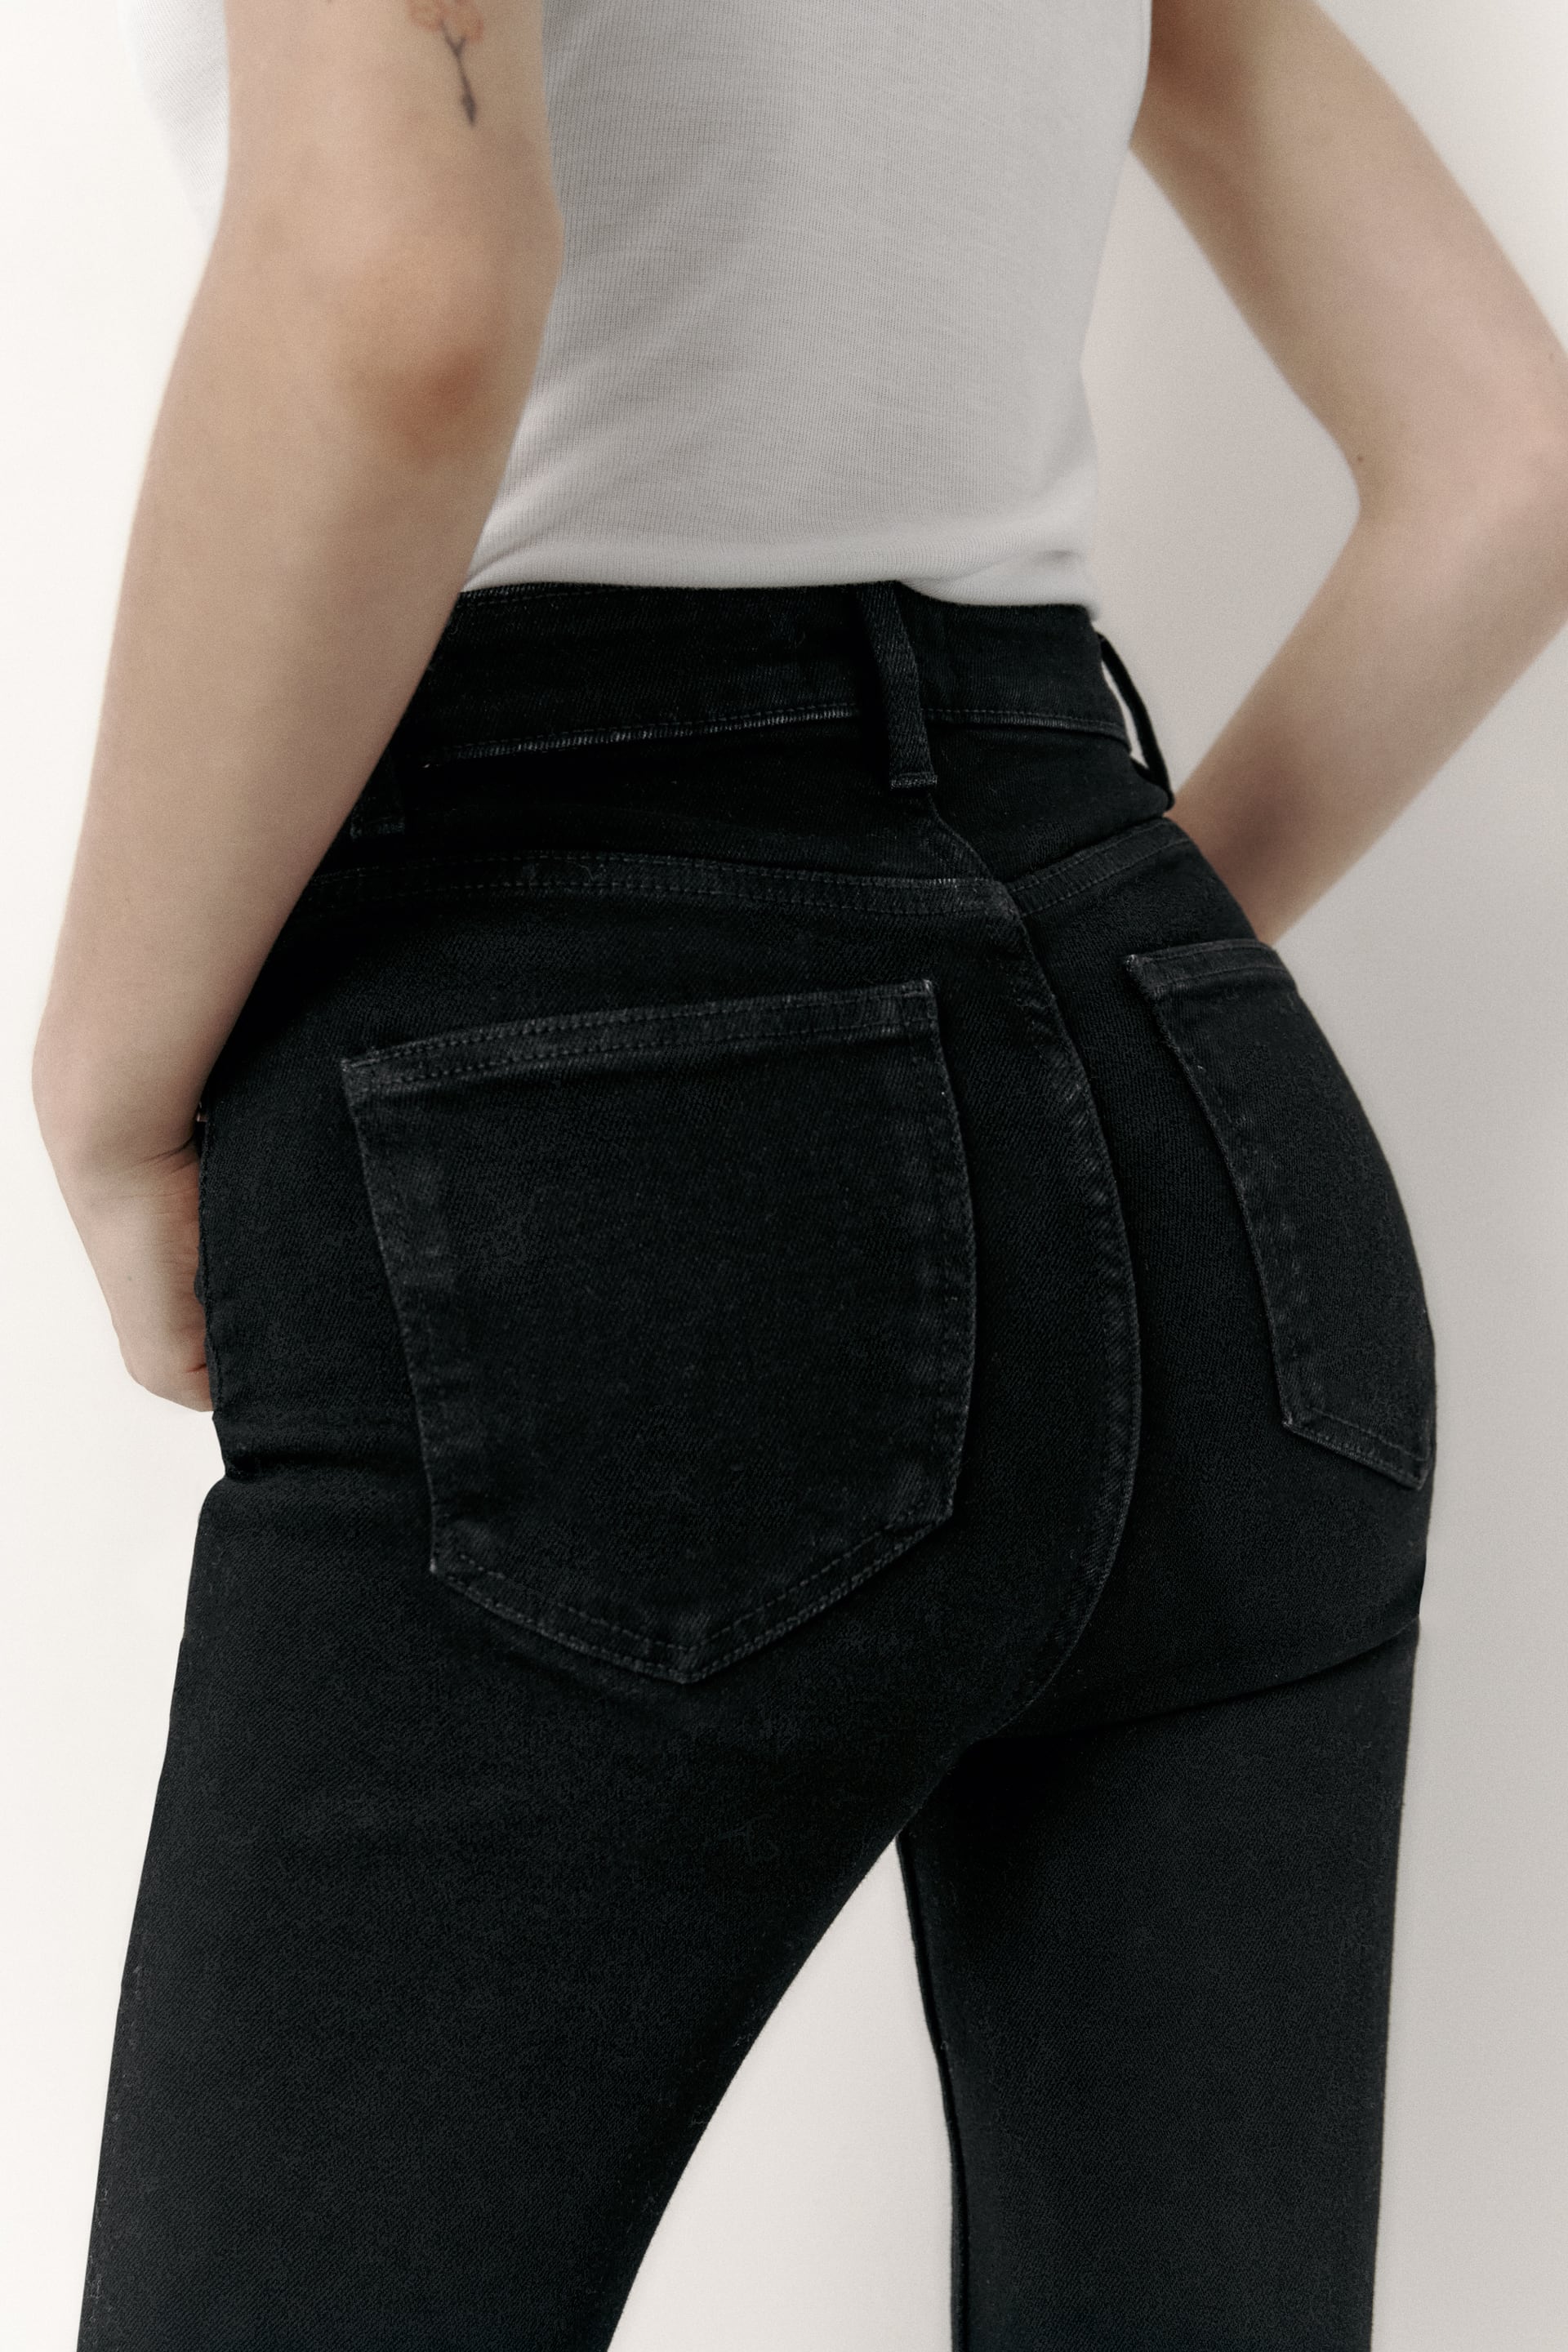 we Appeal to be attractive Min TRF VINTAGE SKINNY JEANS - Black | ZARA United States